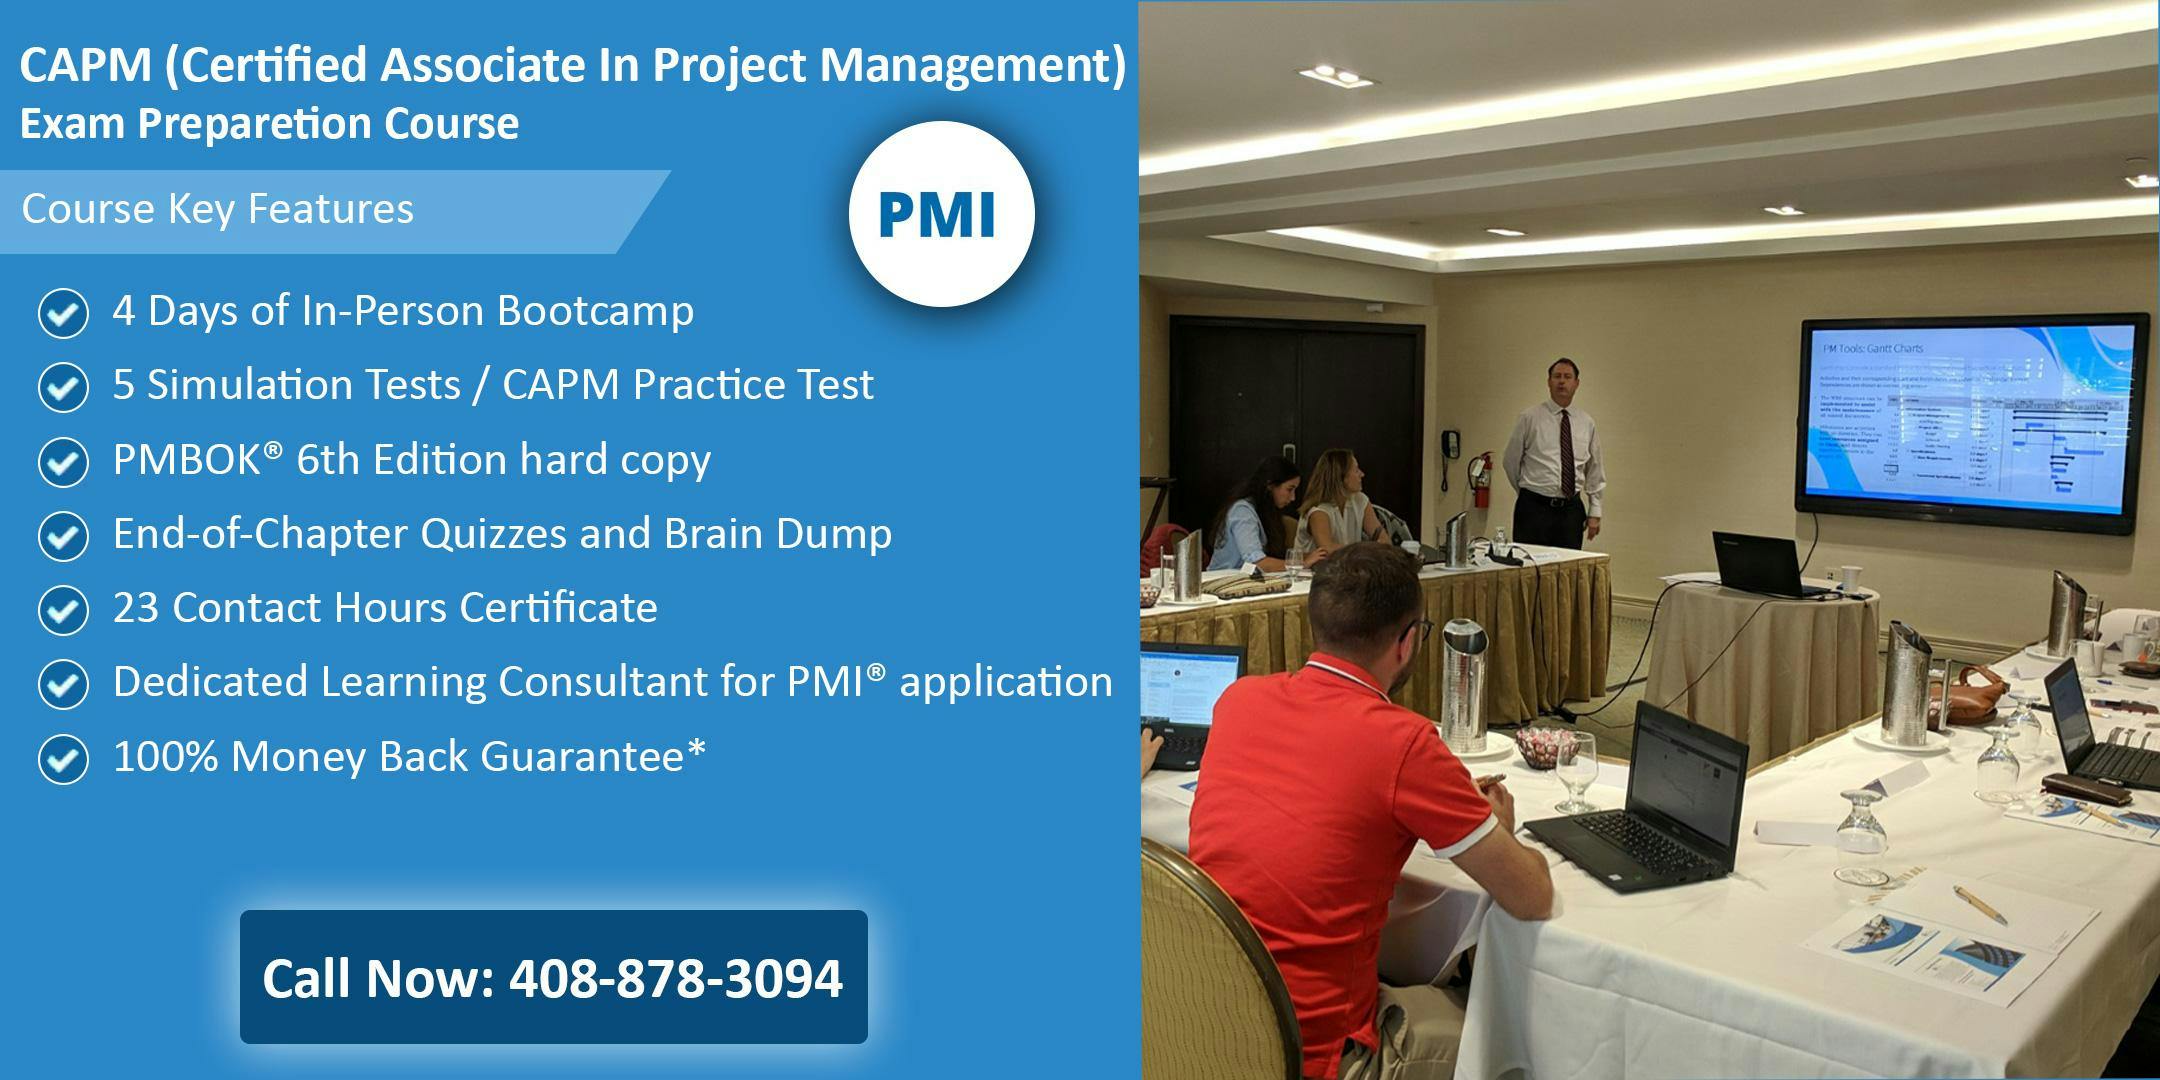 CAPM (Certified Associate In Project Management) Training In Denver, CO